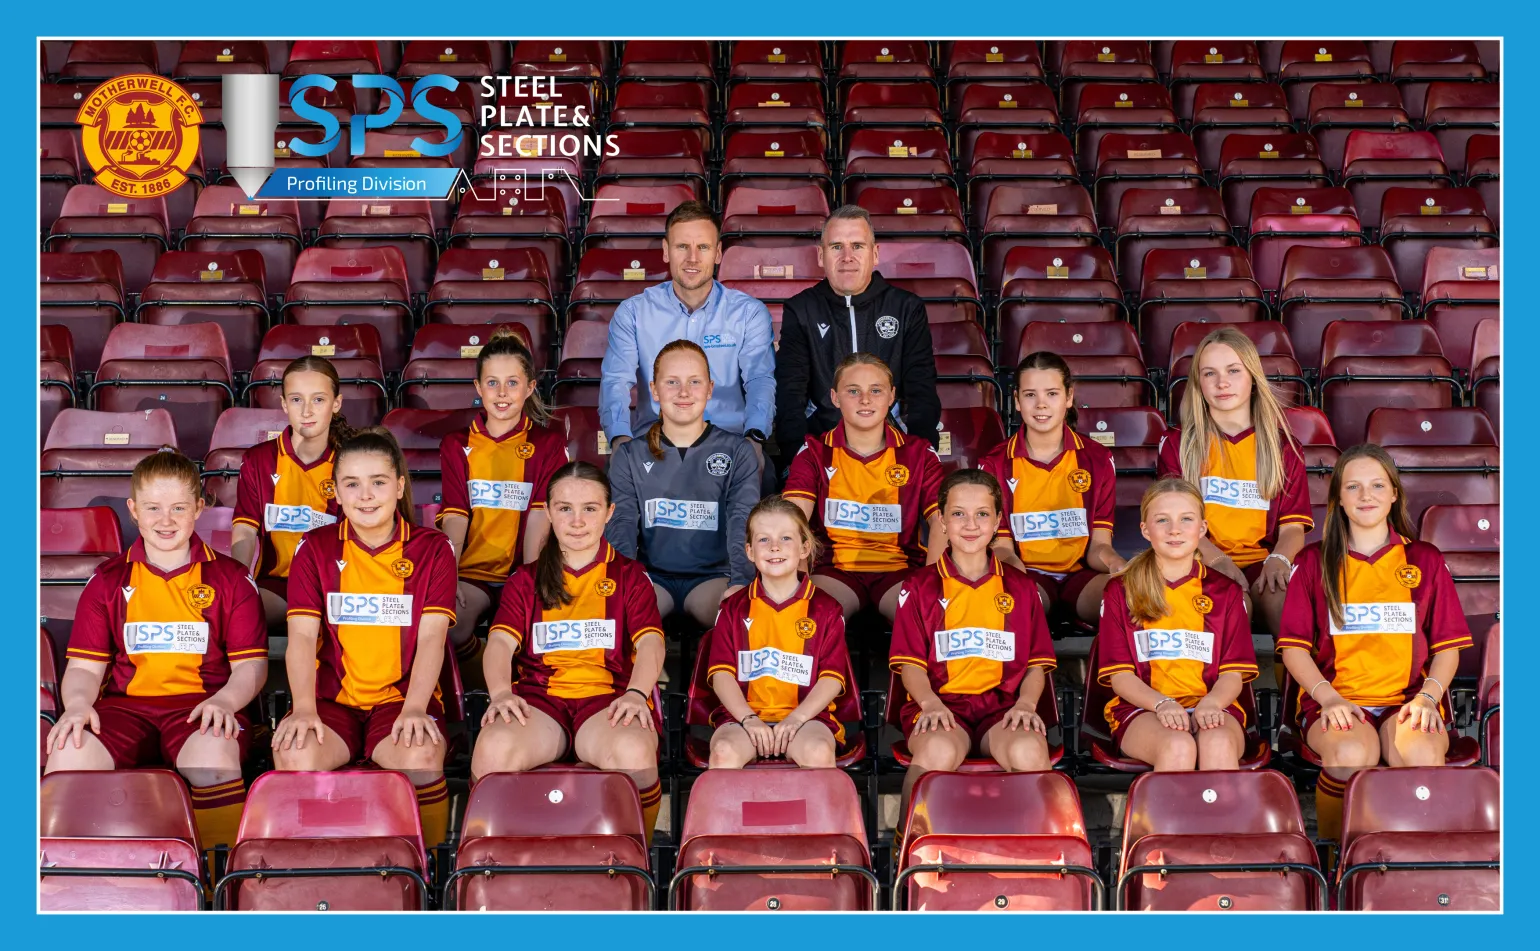 We are delighted to announce that SPS a Division of Barclay & Mathieson, Profiling Division, has proudly sponsored Motherwell Football Club girls U14 Academy squad. 

Known as "The Girls of Steel", this support pays tribute to the area's steelmaking heritage, epitomised by the men's team, "The Steelmen."

Our sponsorship equips the U14 girls with new training gear and features the SPS Profiling logo on their match day kits. This partnership underscores the connection between local industry and community, fostering youth development and unity. It's a symbol of the enduring legacy of steelmaking and a bright future for young athletes in the community.
